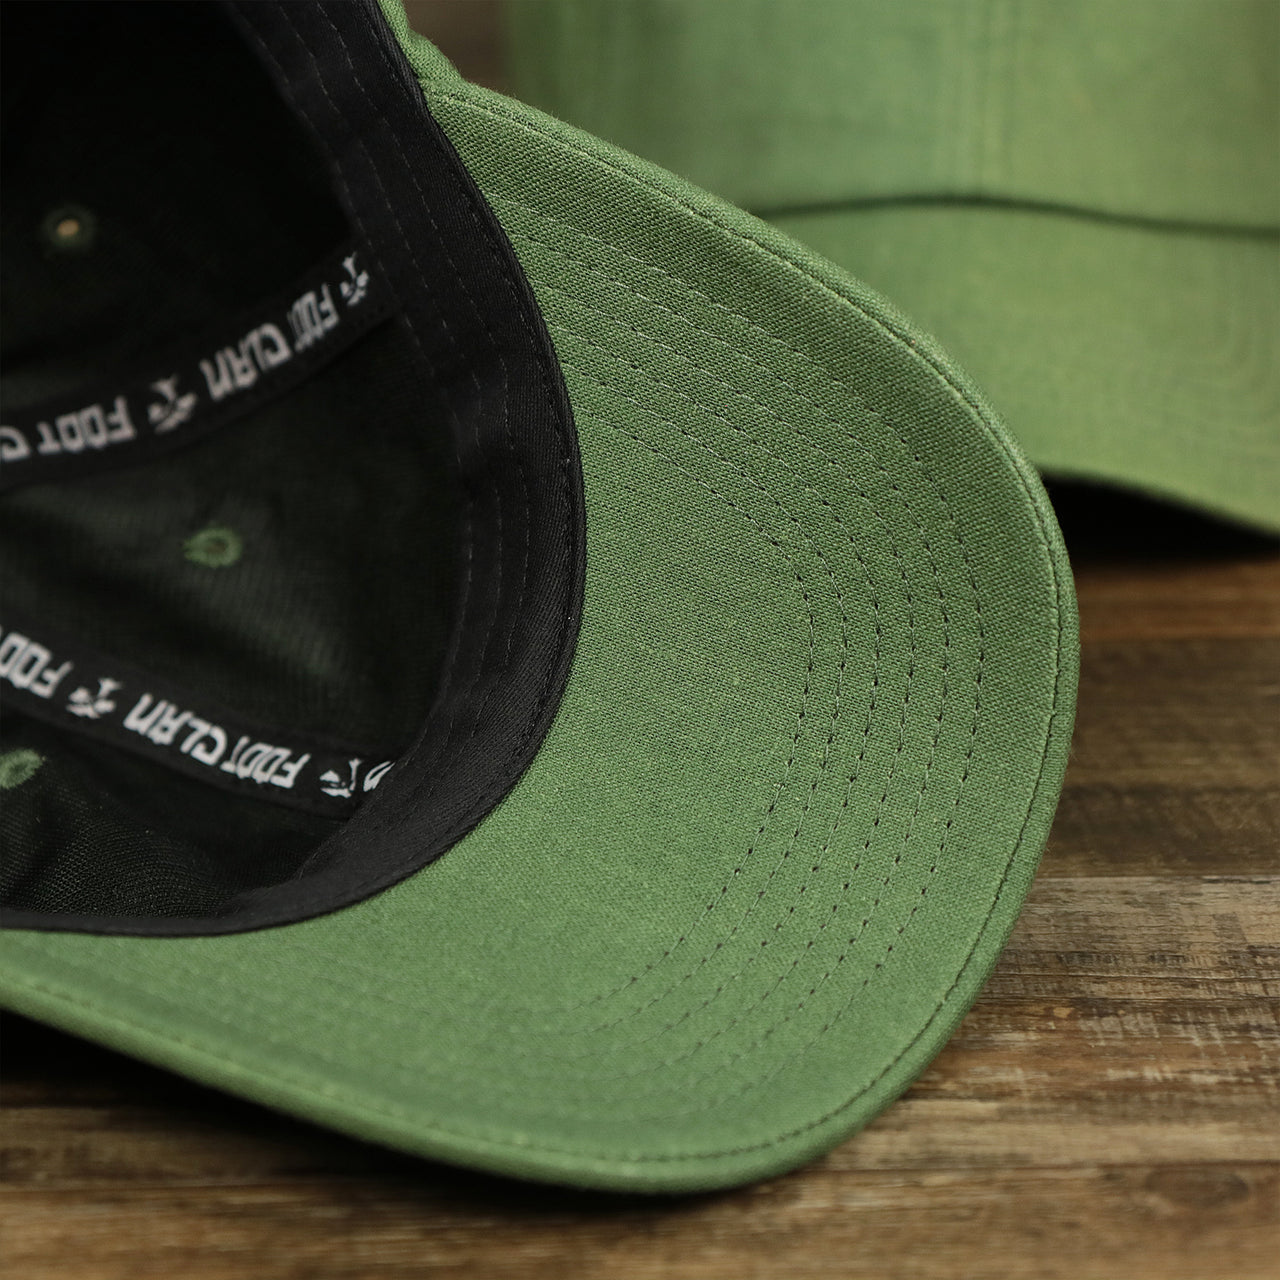 FOOT CLAN | DAD HAT | LINEN MATERIAL BLANK OSFM COTTON UNSTRUCTURED ADJUSTABLE, LODI GREEN, OSFM